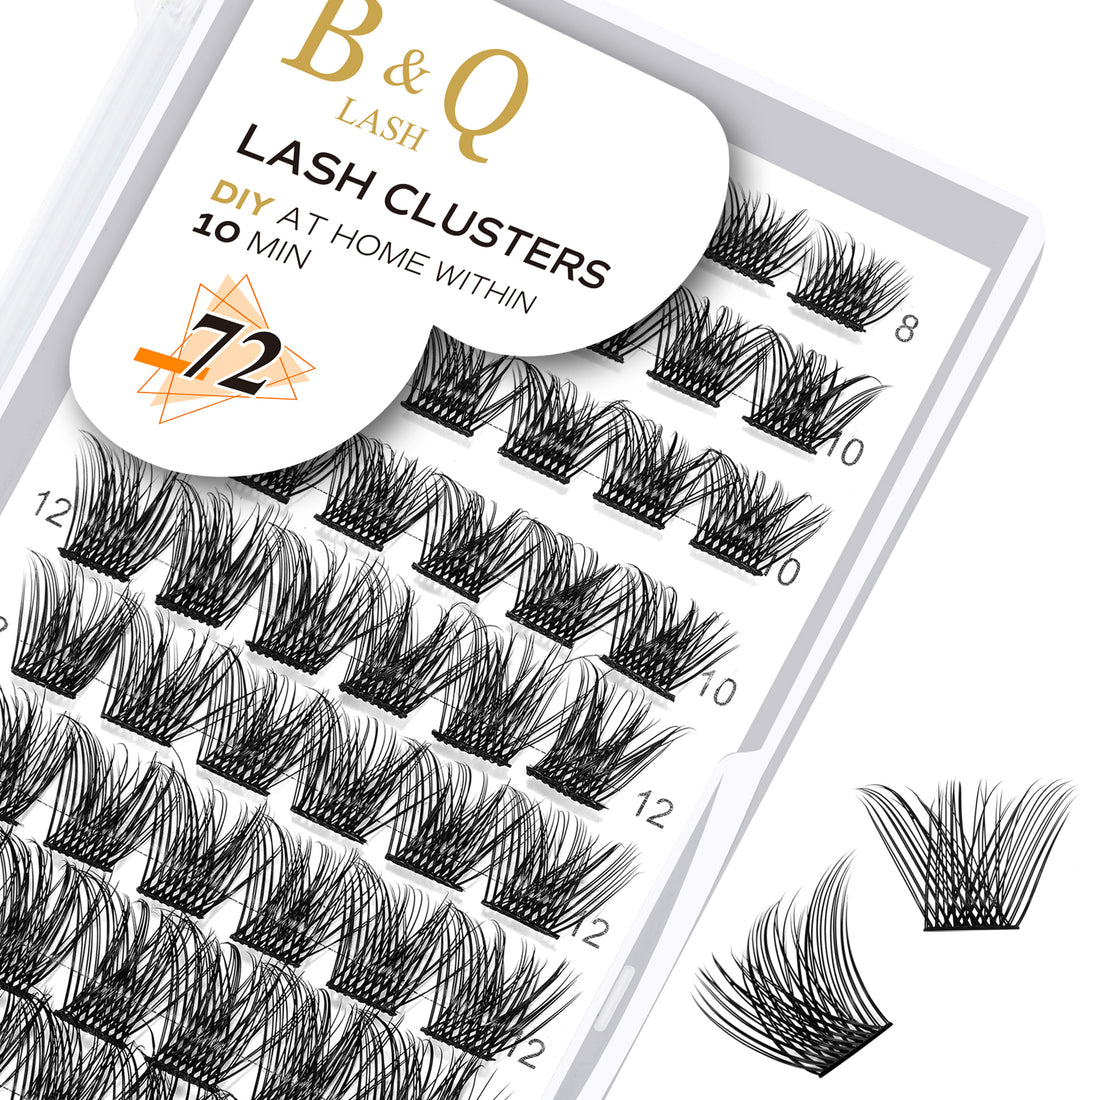 Free, just pay shipping|B02 Lash Clusters DIY Eyelash Extensions 72 Clusters Lashes